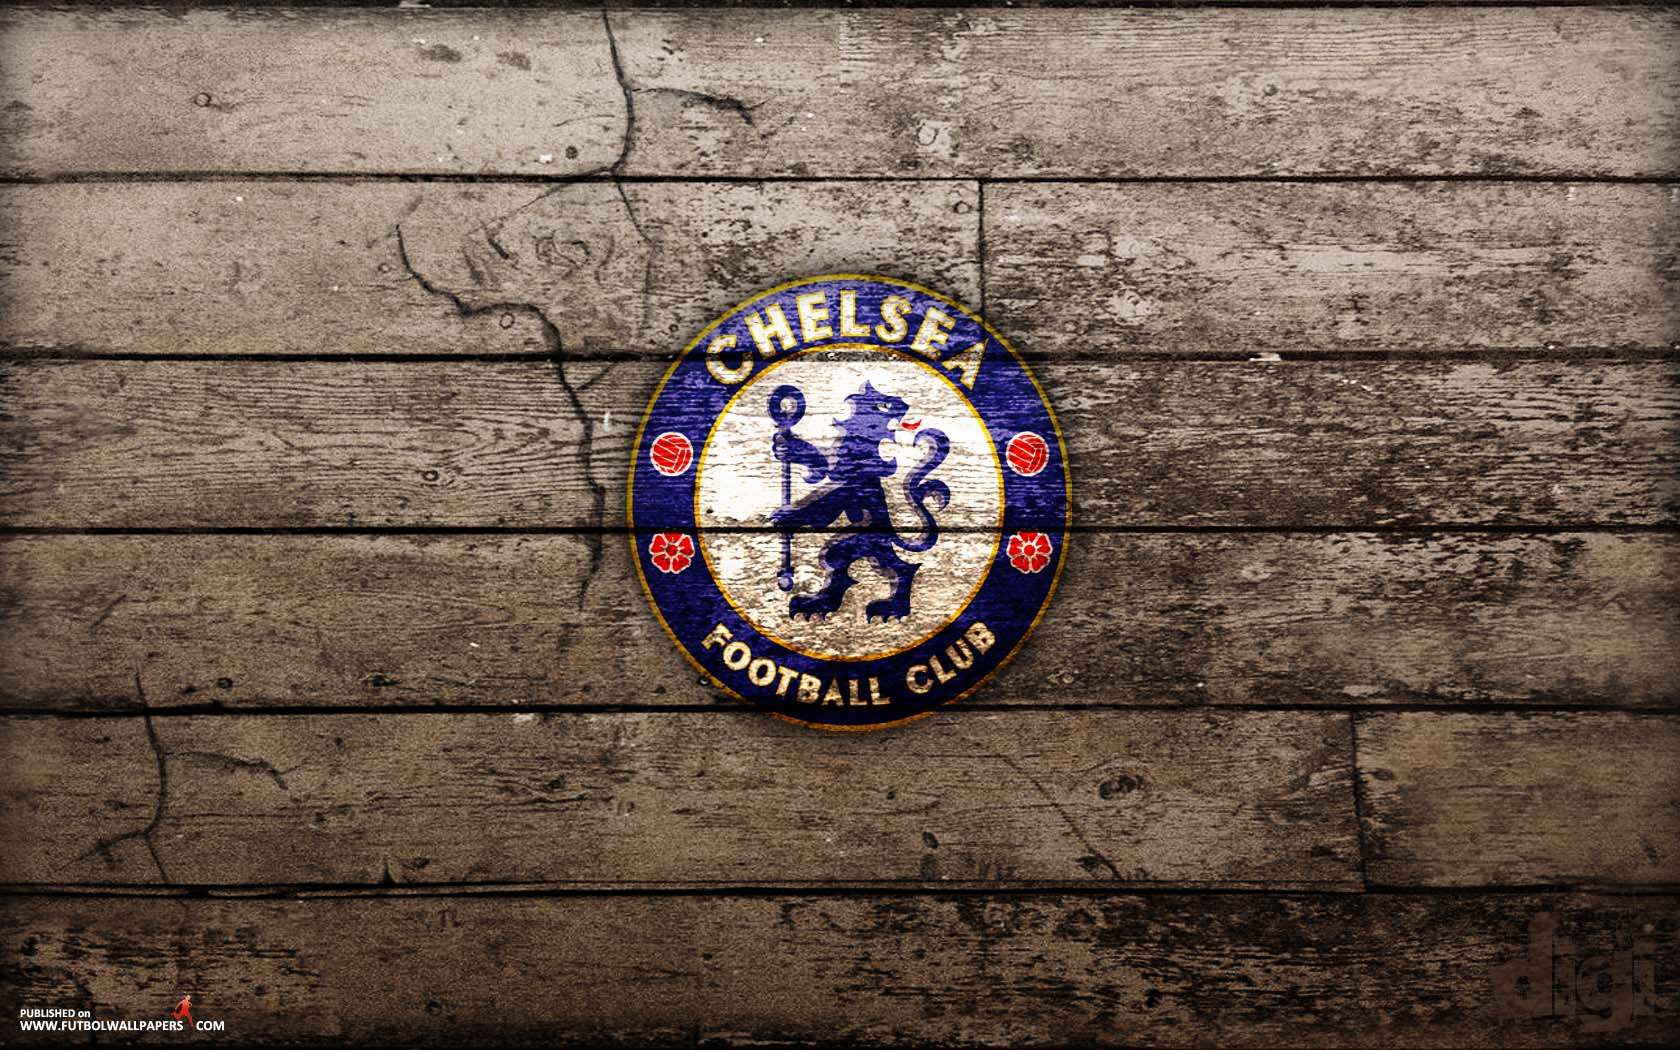 Wallpaper Chelsea Football Club This Use for Facebook Cover Edit